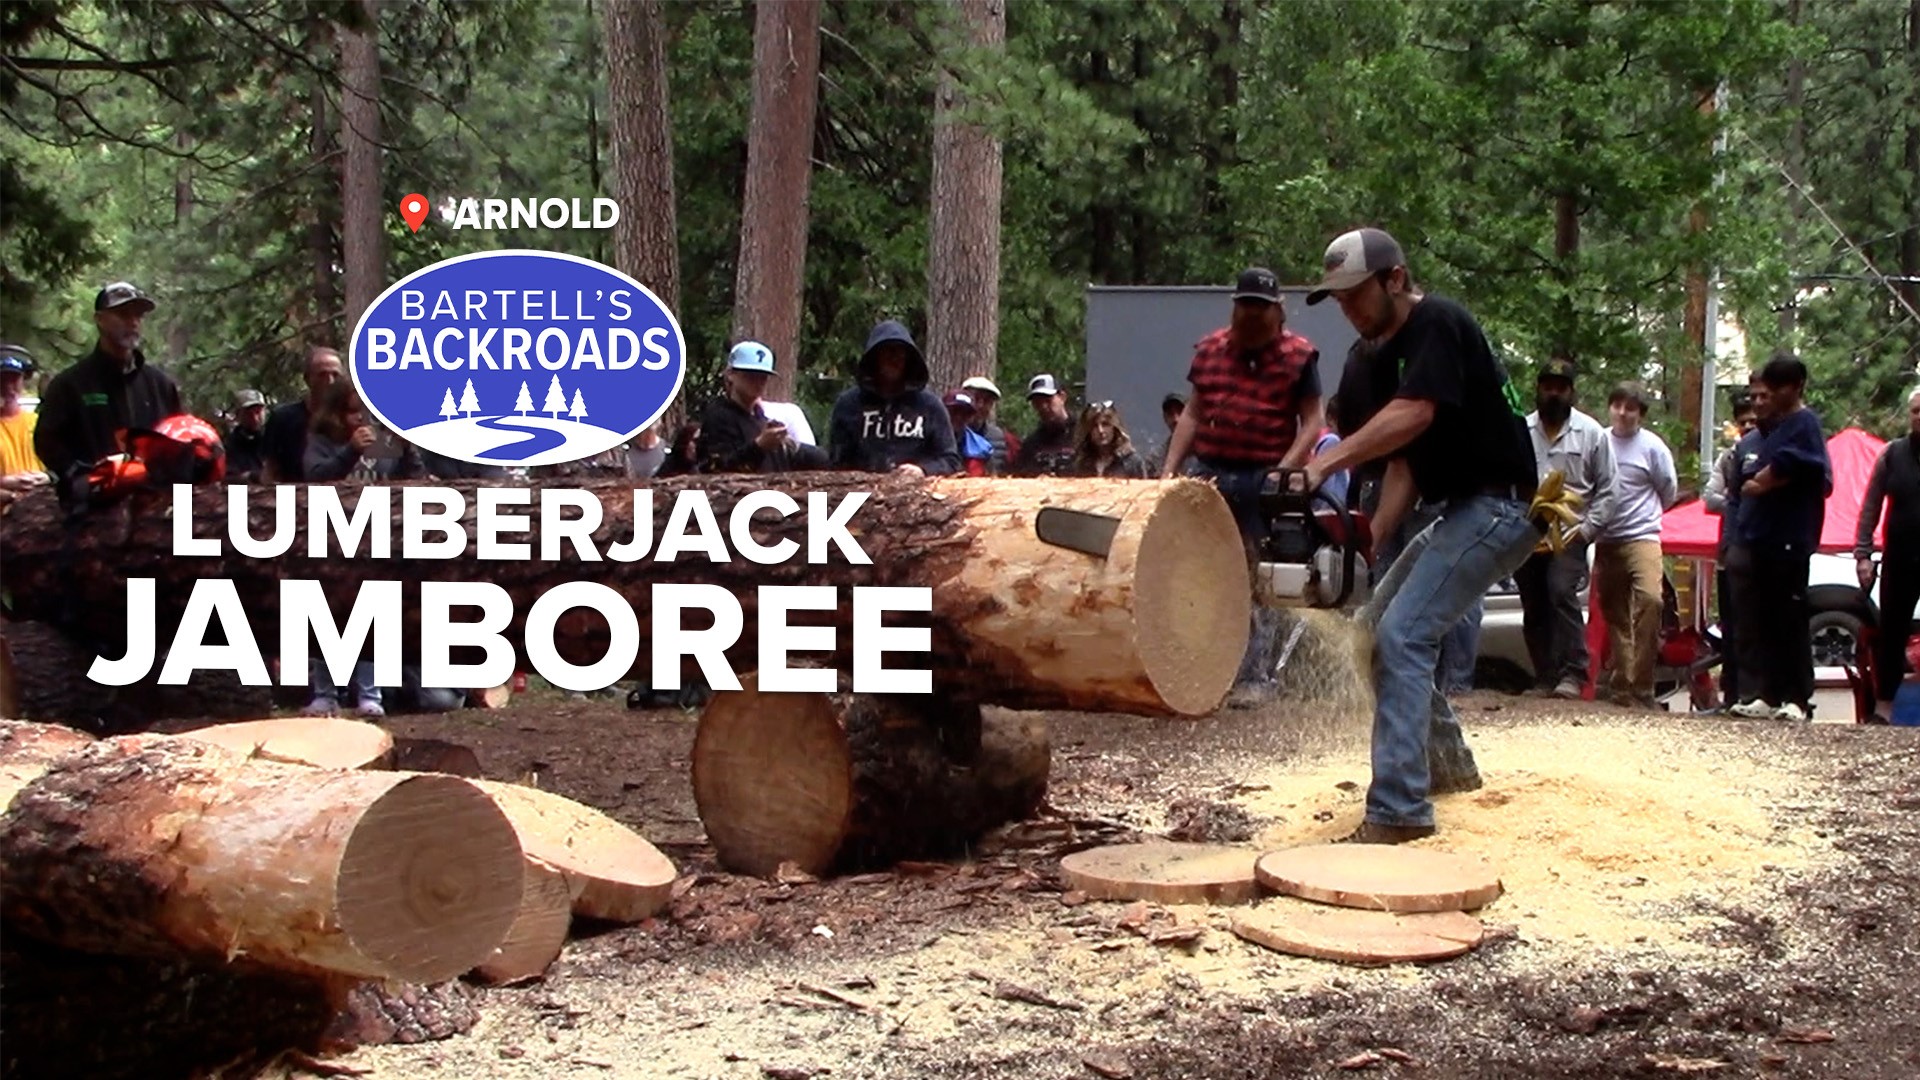 The Sierra Nevada Logging Museum is home to the annual Lumberjack Jamboree, plus more axes and chainsaws than you can shake a stick at.